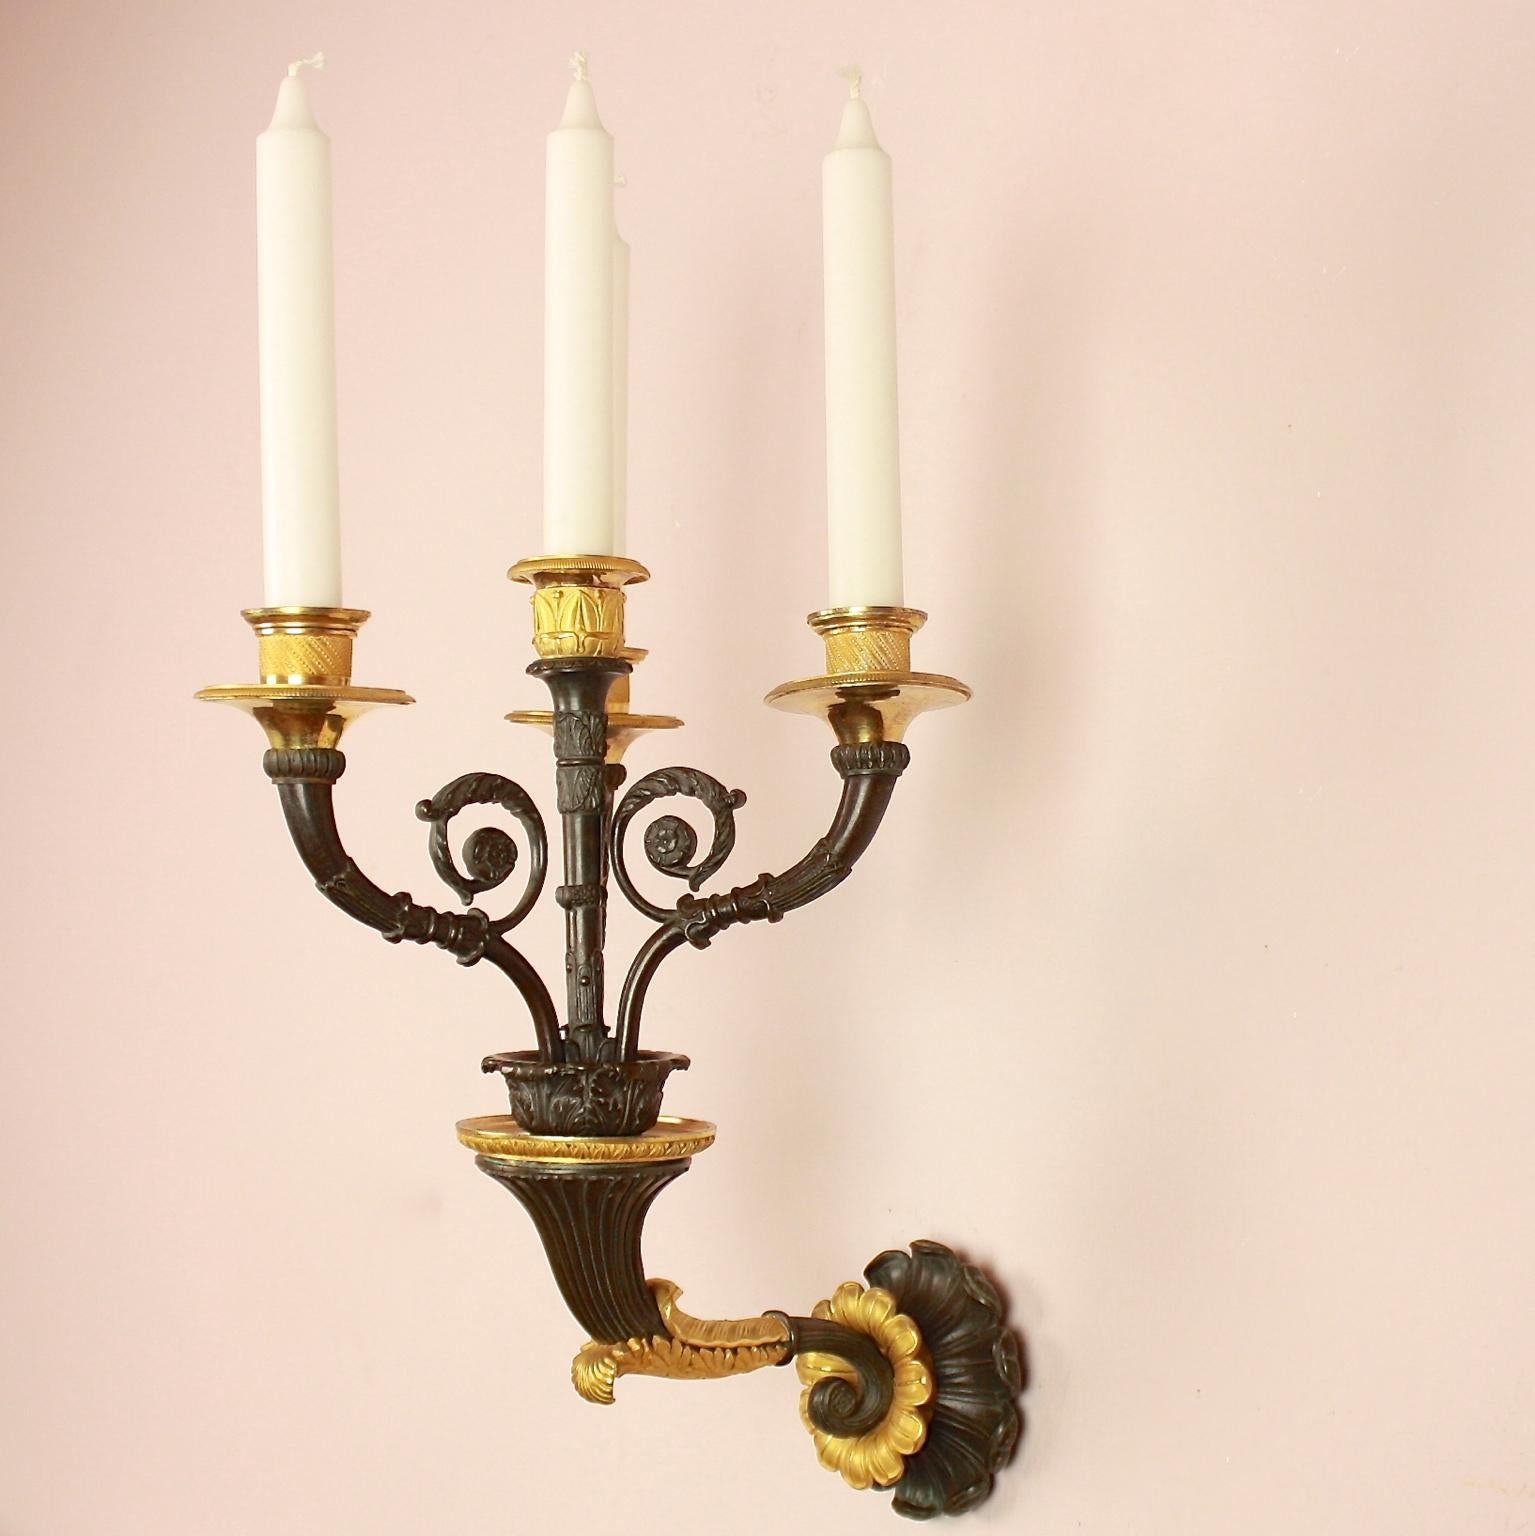 Pair of Empire/ Charles X Gilt and Patinated Bronze Four-Light Wall Appliques or Sconces

A pair of Empire/ Charles X four-branch ormolu/gilt and patinated bronze wall lights “à la corne d'abondance” of excellent quality. Each finely cast with a